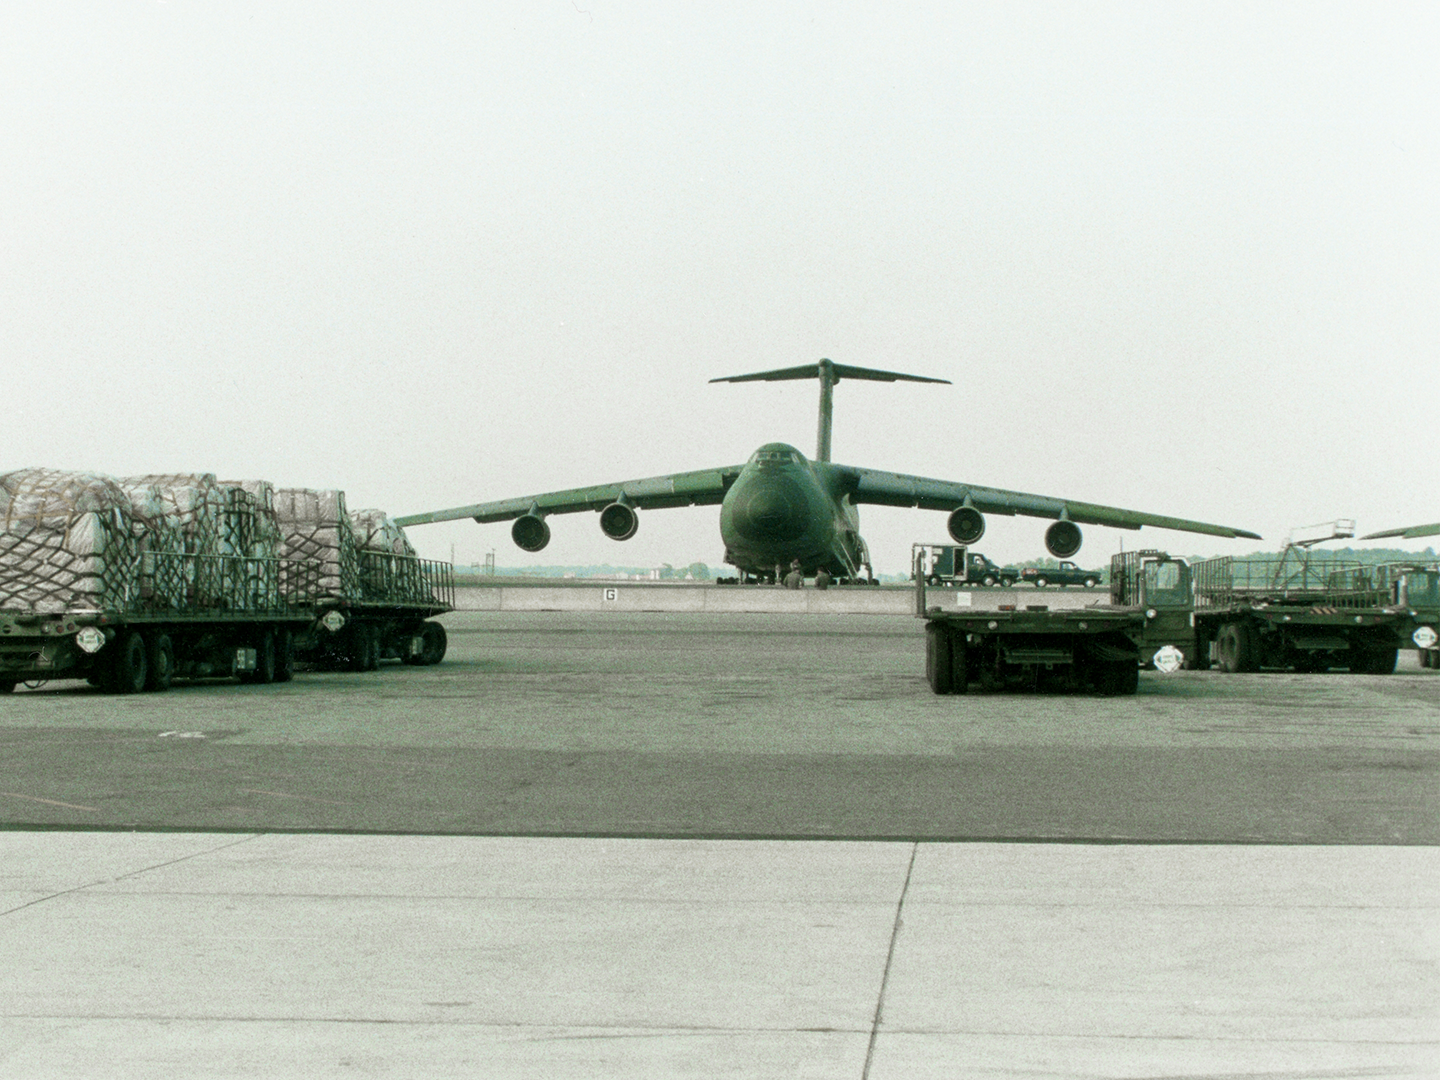 The U Pride of Place .S. Air National Guard delivering food and supplies to an ailing Armenia.